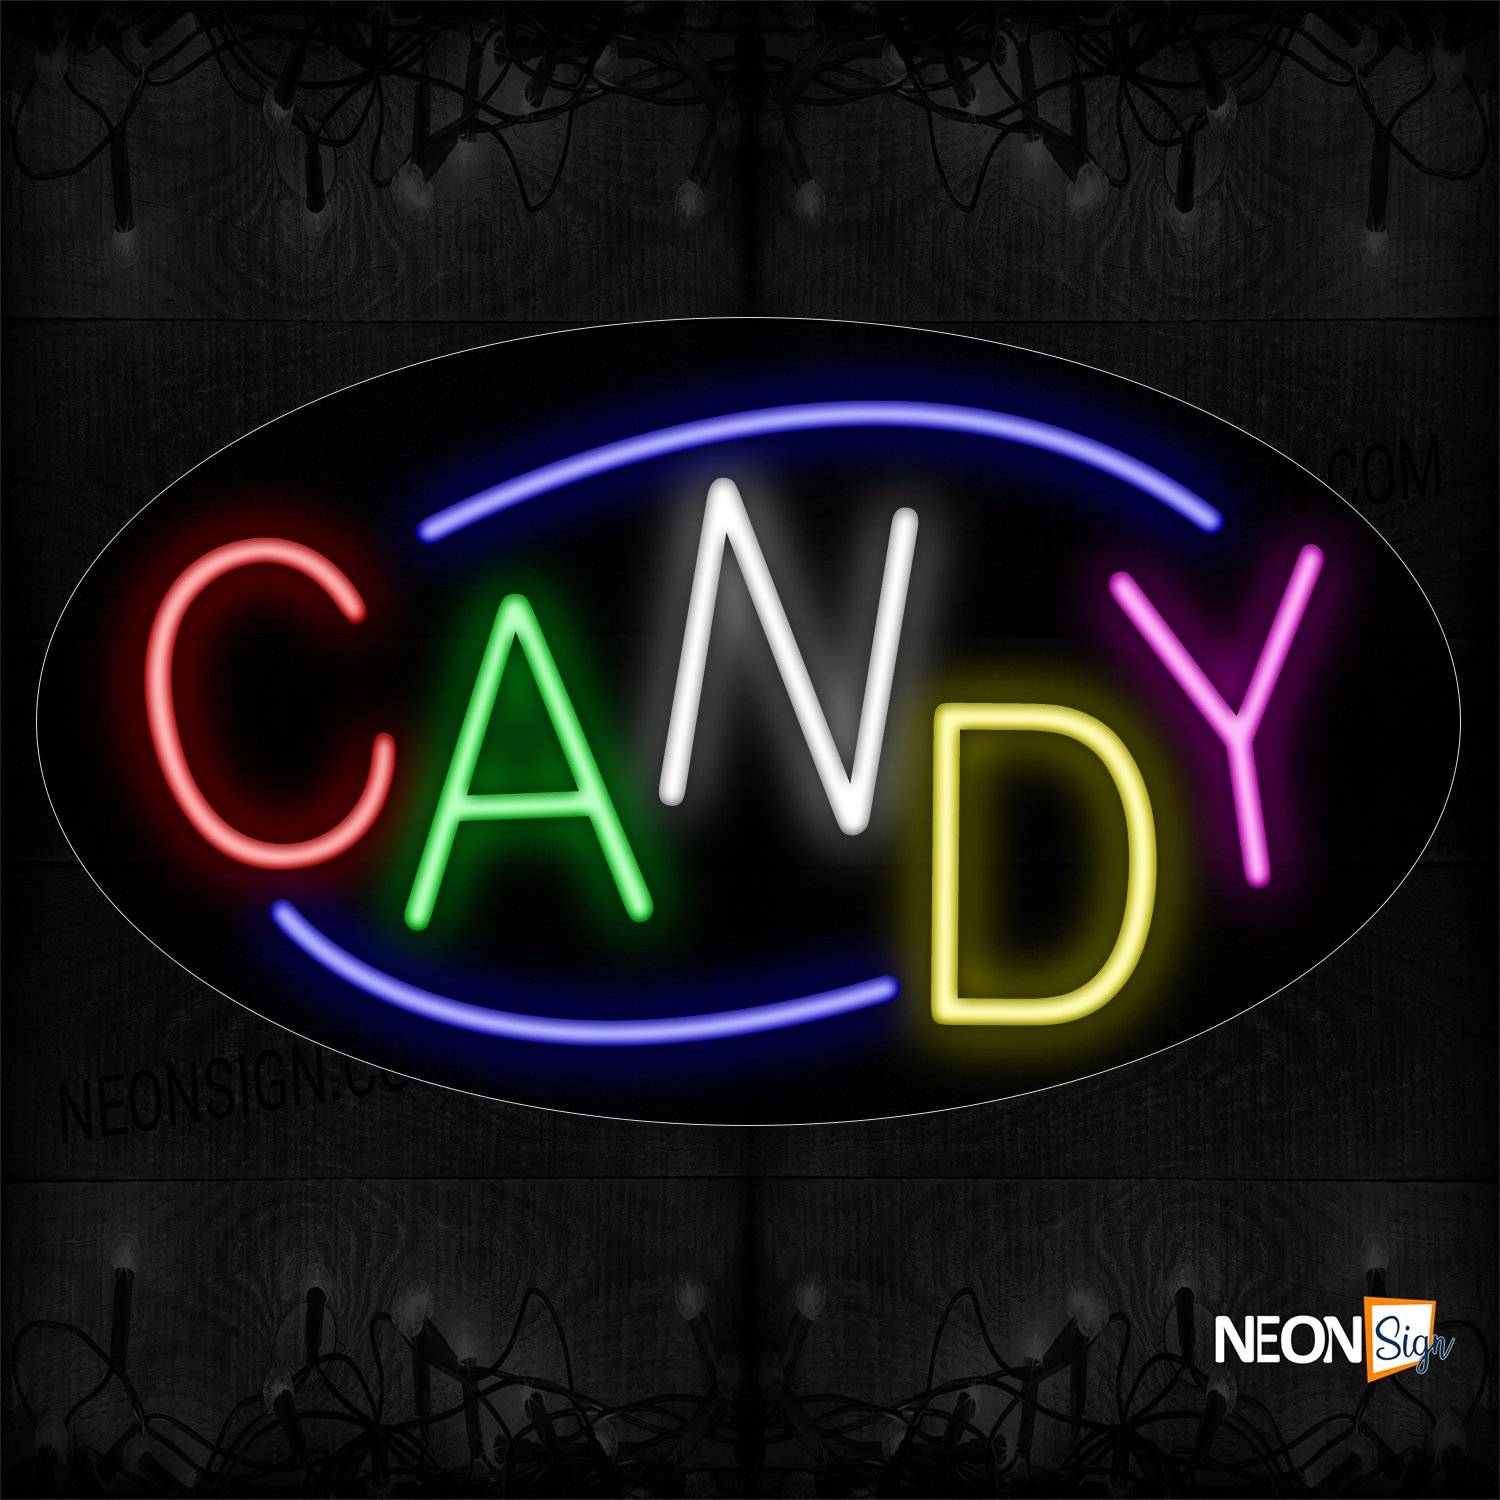 Image of 14168 Colorful Candy With Blue Arc Border Neon Sign_17x30 Contoured Black Backing